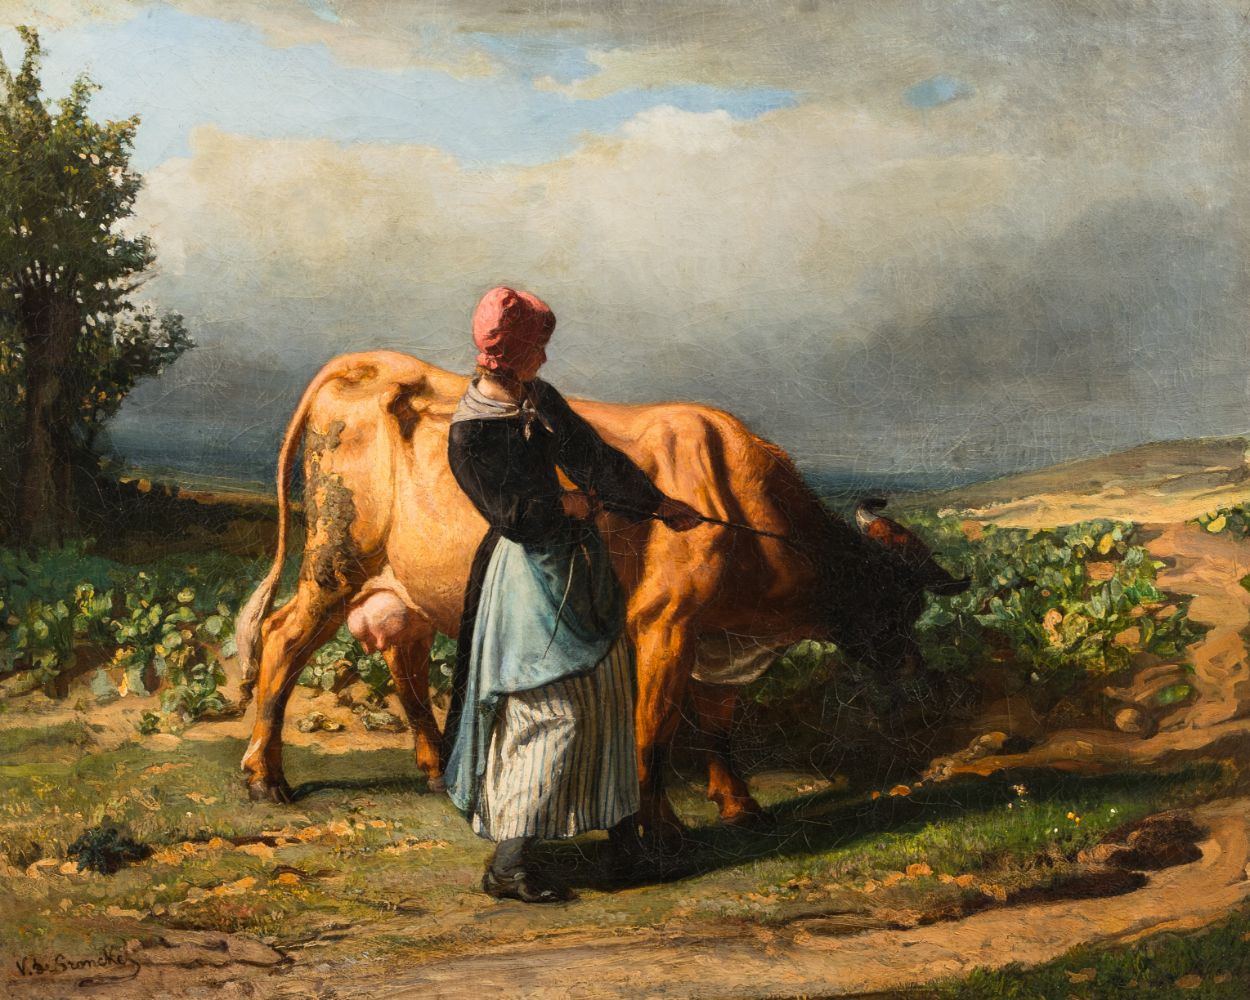 The Unusual Sale: Old Masters and 19th-C. Paintings - Ukraine Charity Auction